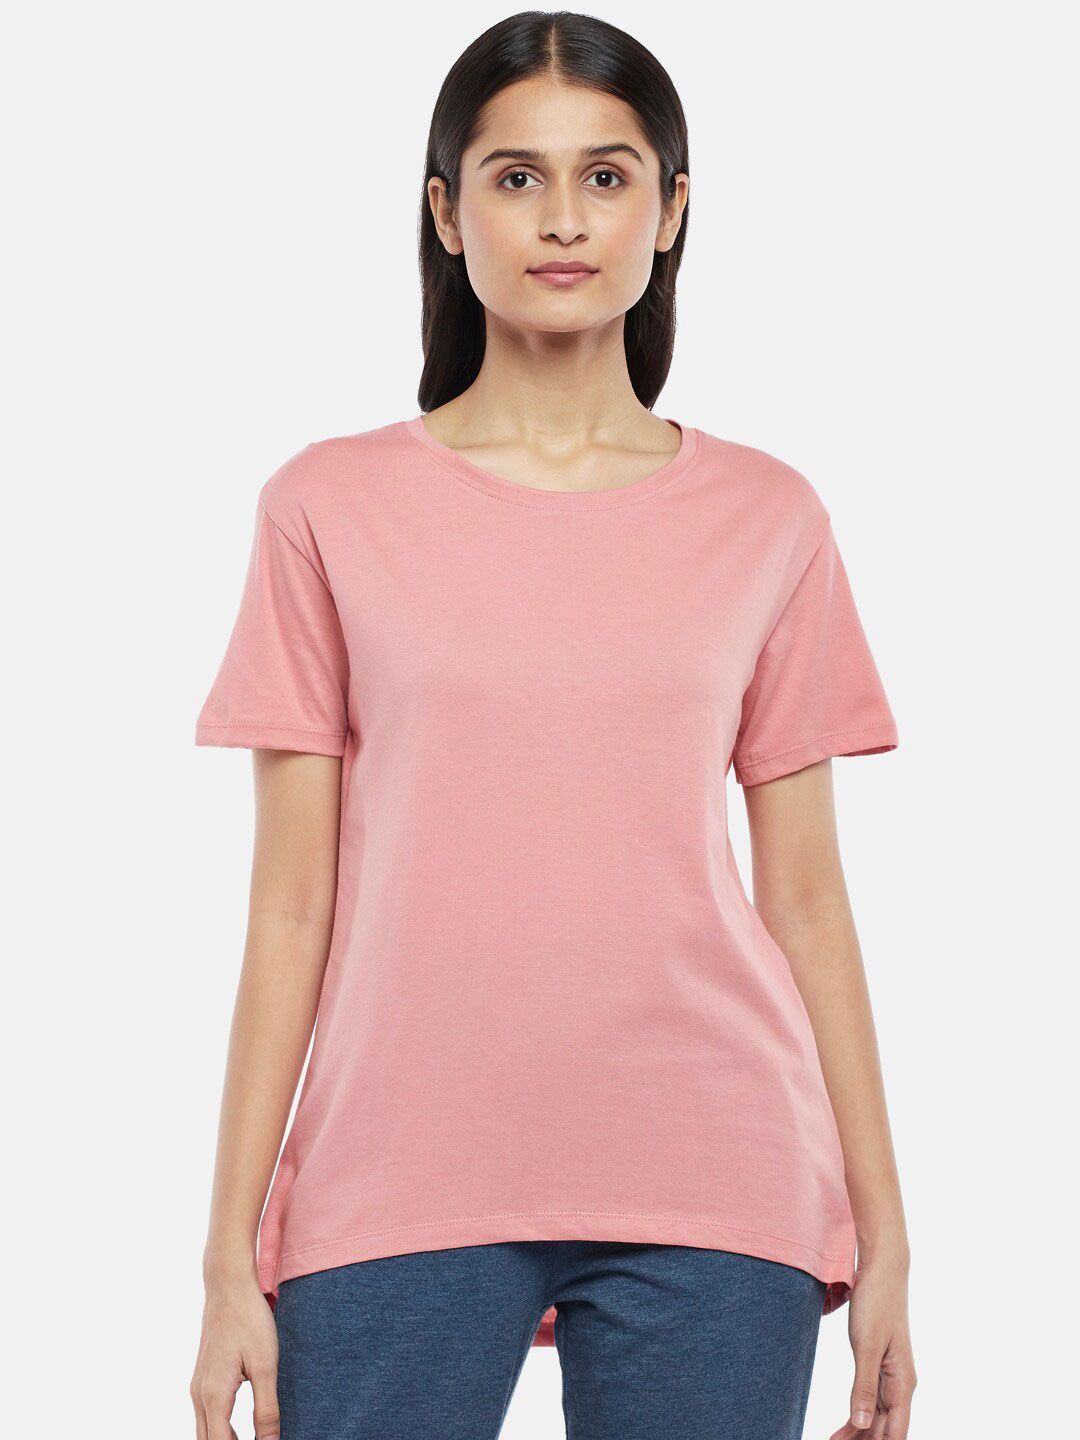 Dreamz by Pantaloons Pink Lounge tshirt Price in India